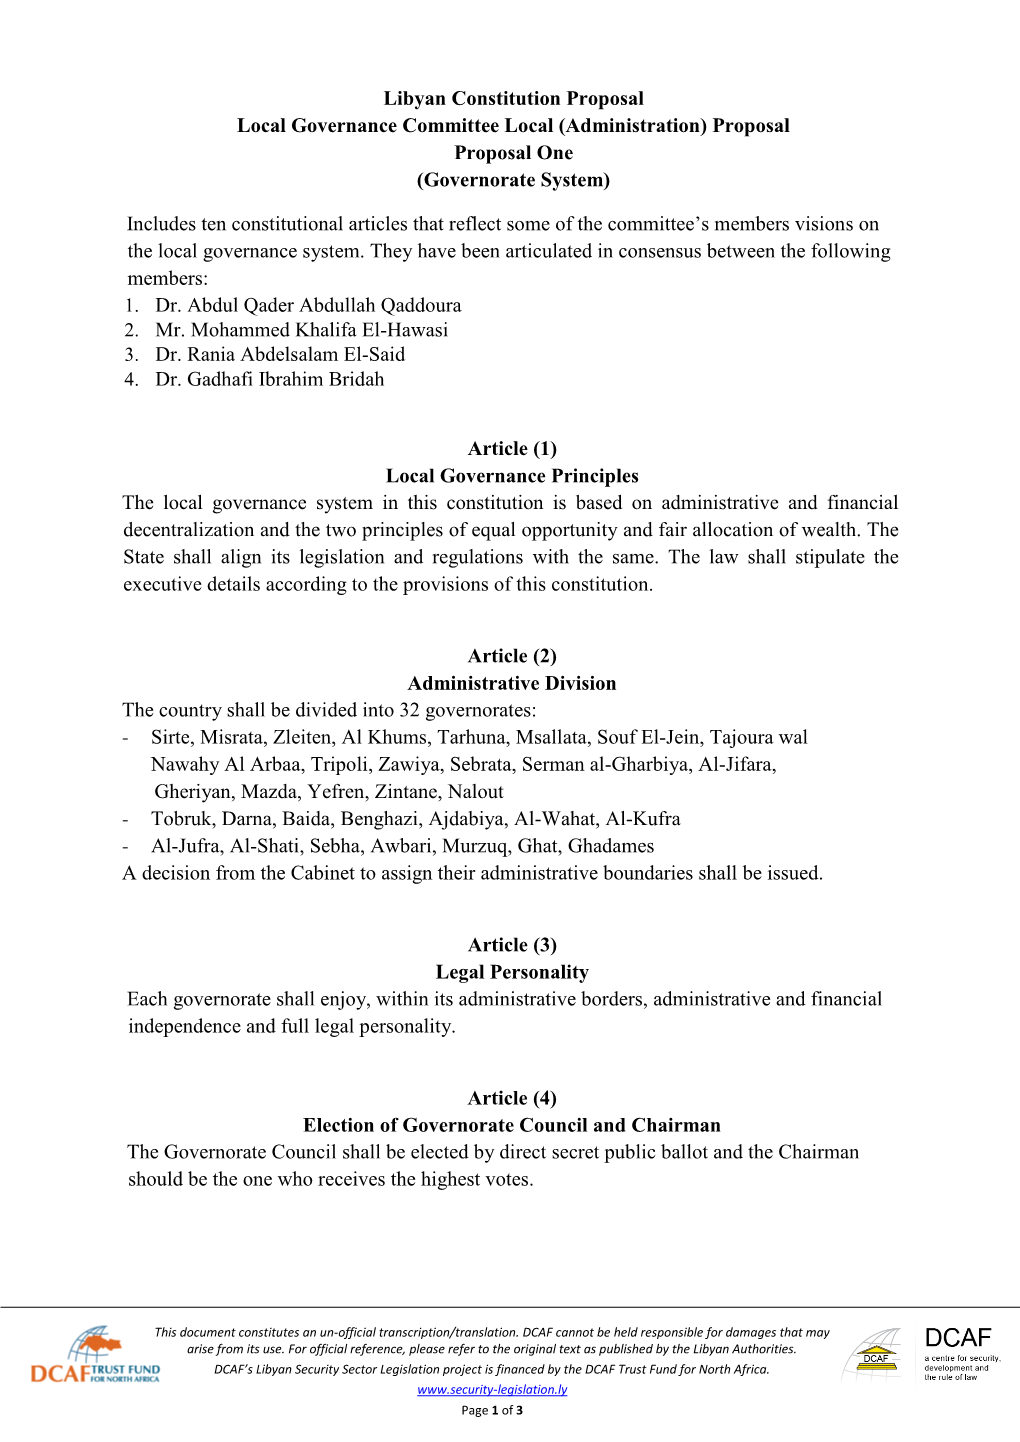 Libyan Constitution Proposal Local Governance Committee Local (Administration) Proposal Proposal One (Governorate System)